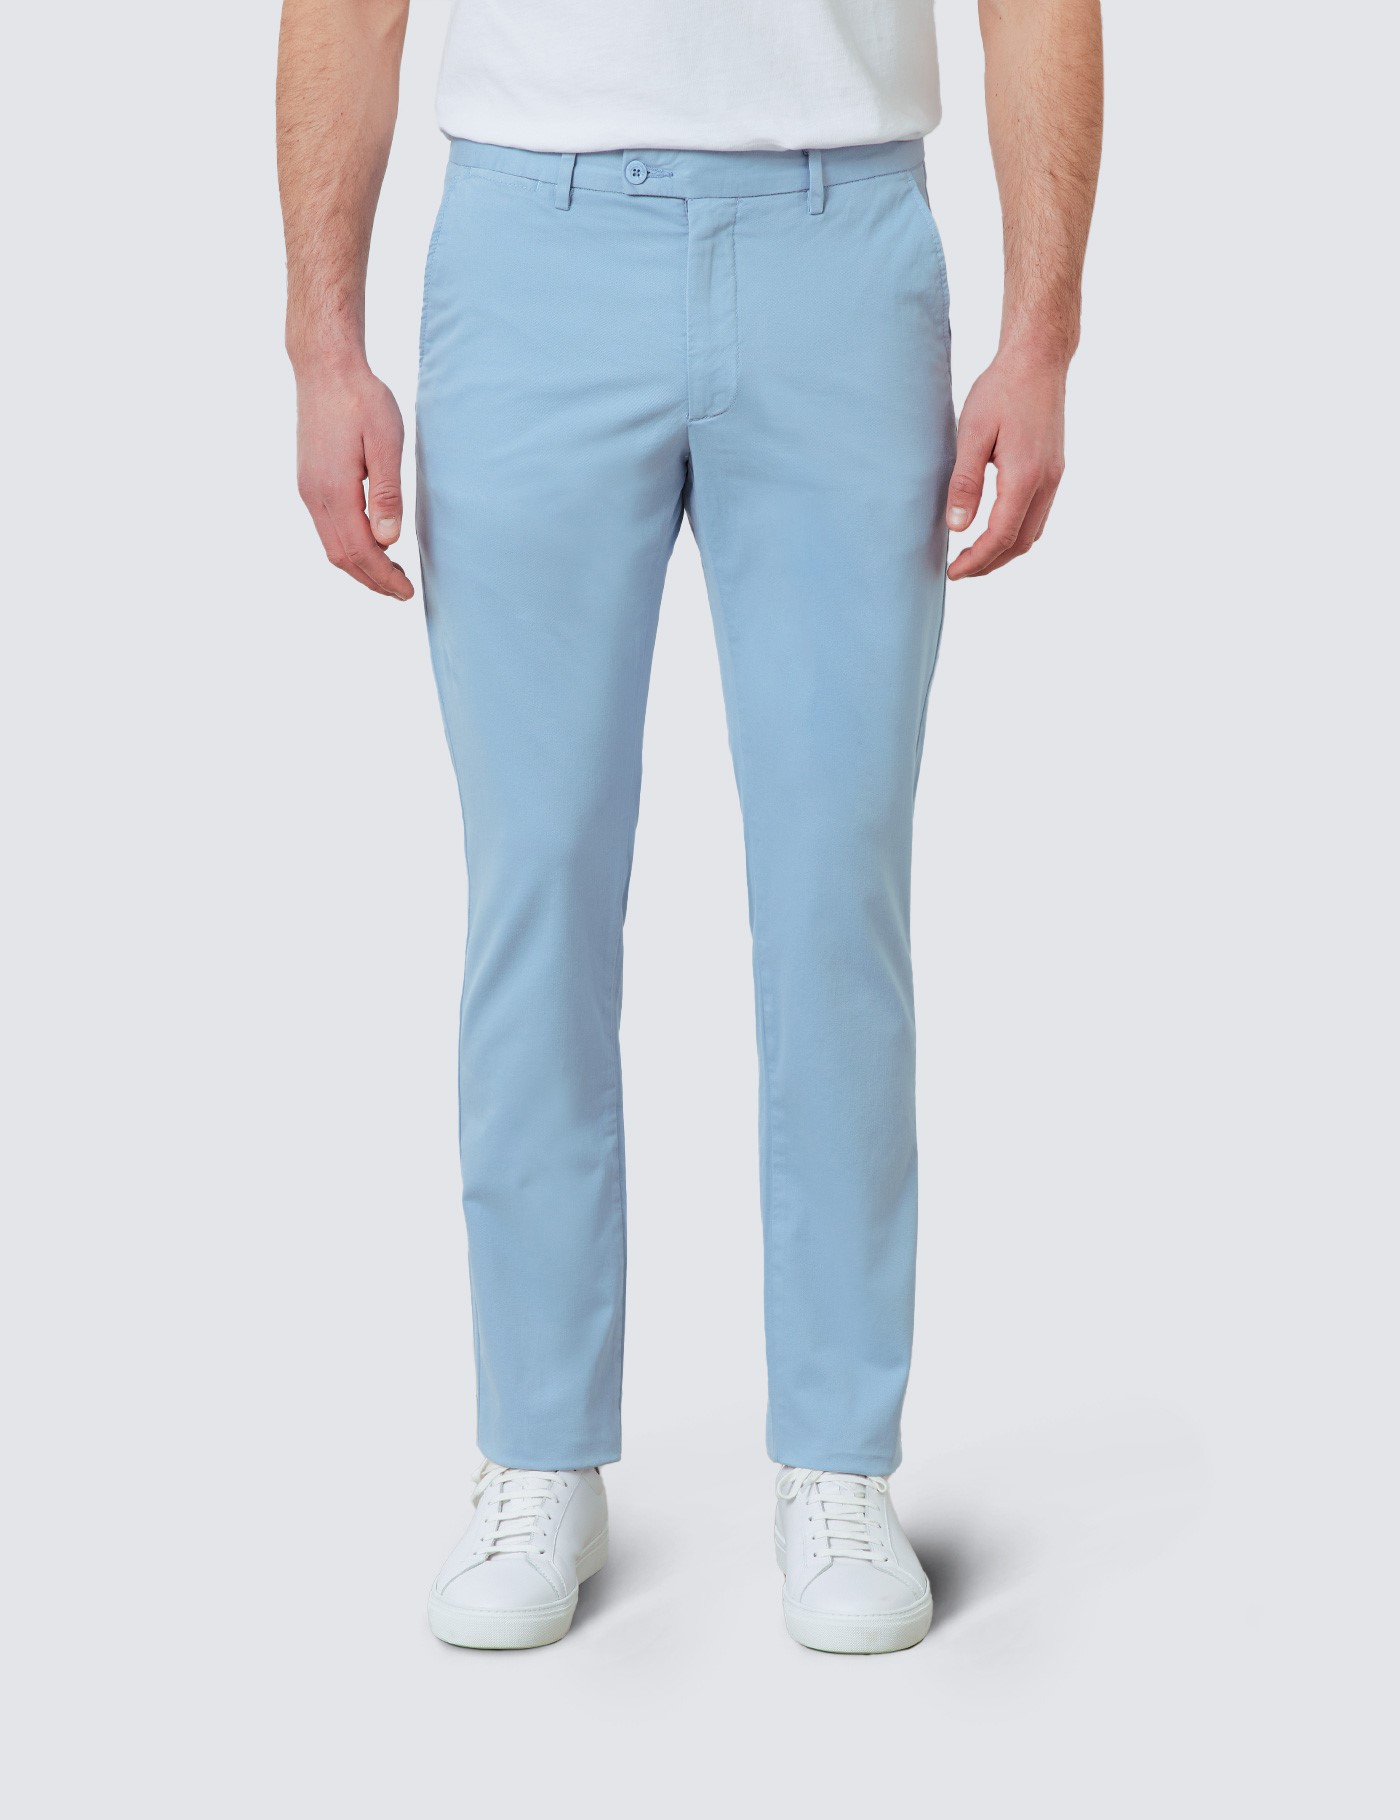 United Colors of Benetton Slim Fit Men Blue Trousers - Buy United Colors of  Benetton Slim Fit Men Blue Trousers Online at Best Prices in India |  Flipkart.com